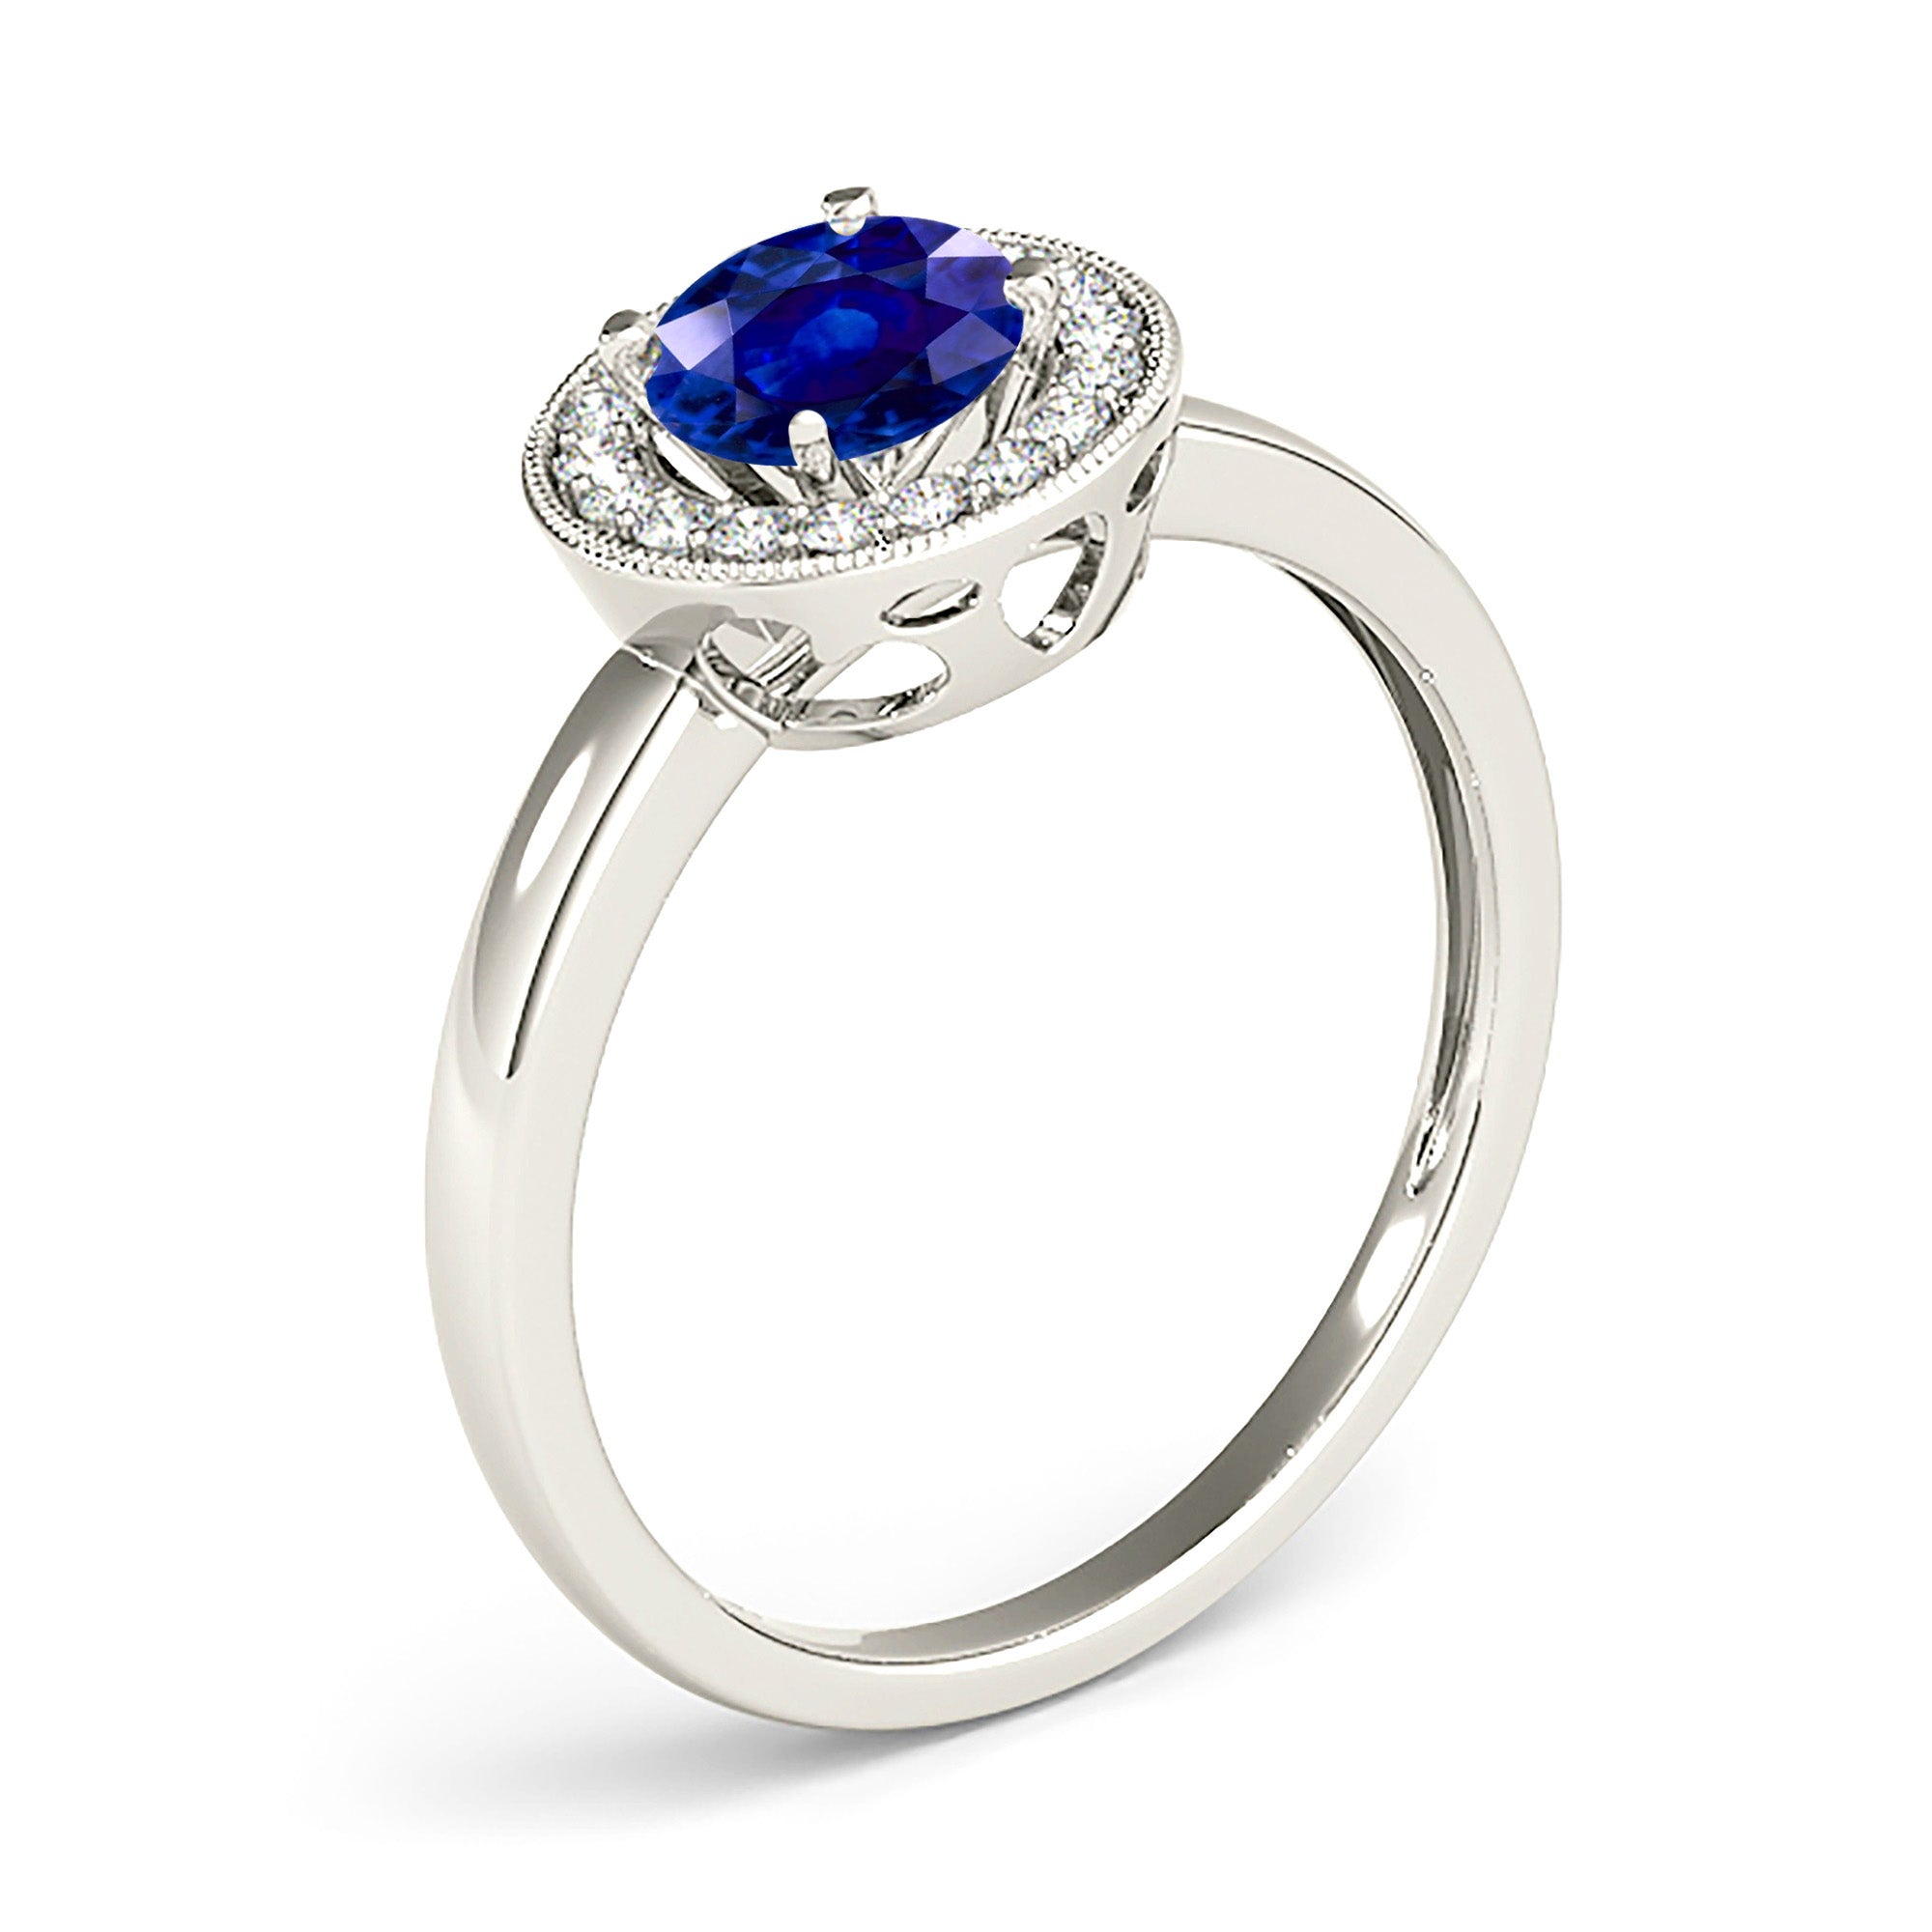 1.35 ct. Genuine Blue Sapphire Solitaire Milgrain Halo Ring With 0.20 ctw Side Diamonds-in 14K/18K White, Yellow, Rose Gold and Platinum - Christmas Jewelry Gift -VIRABYANI